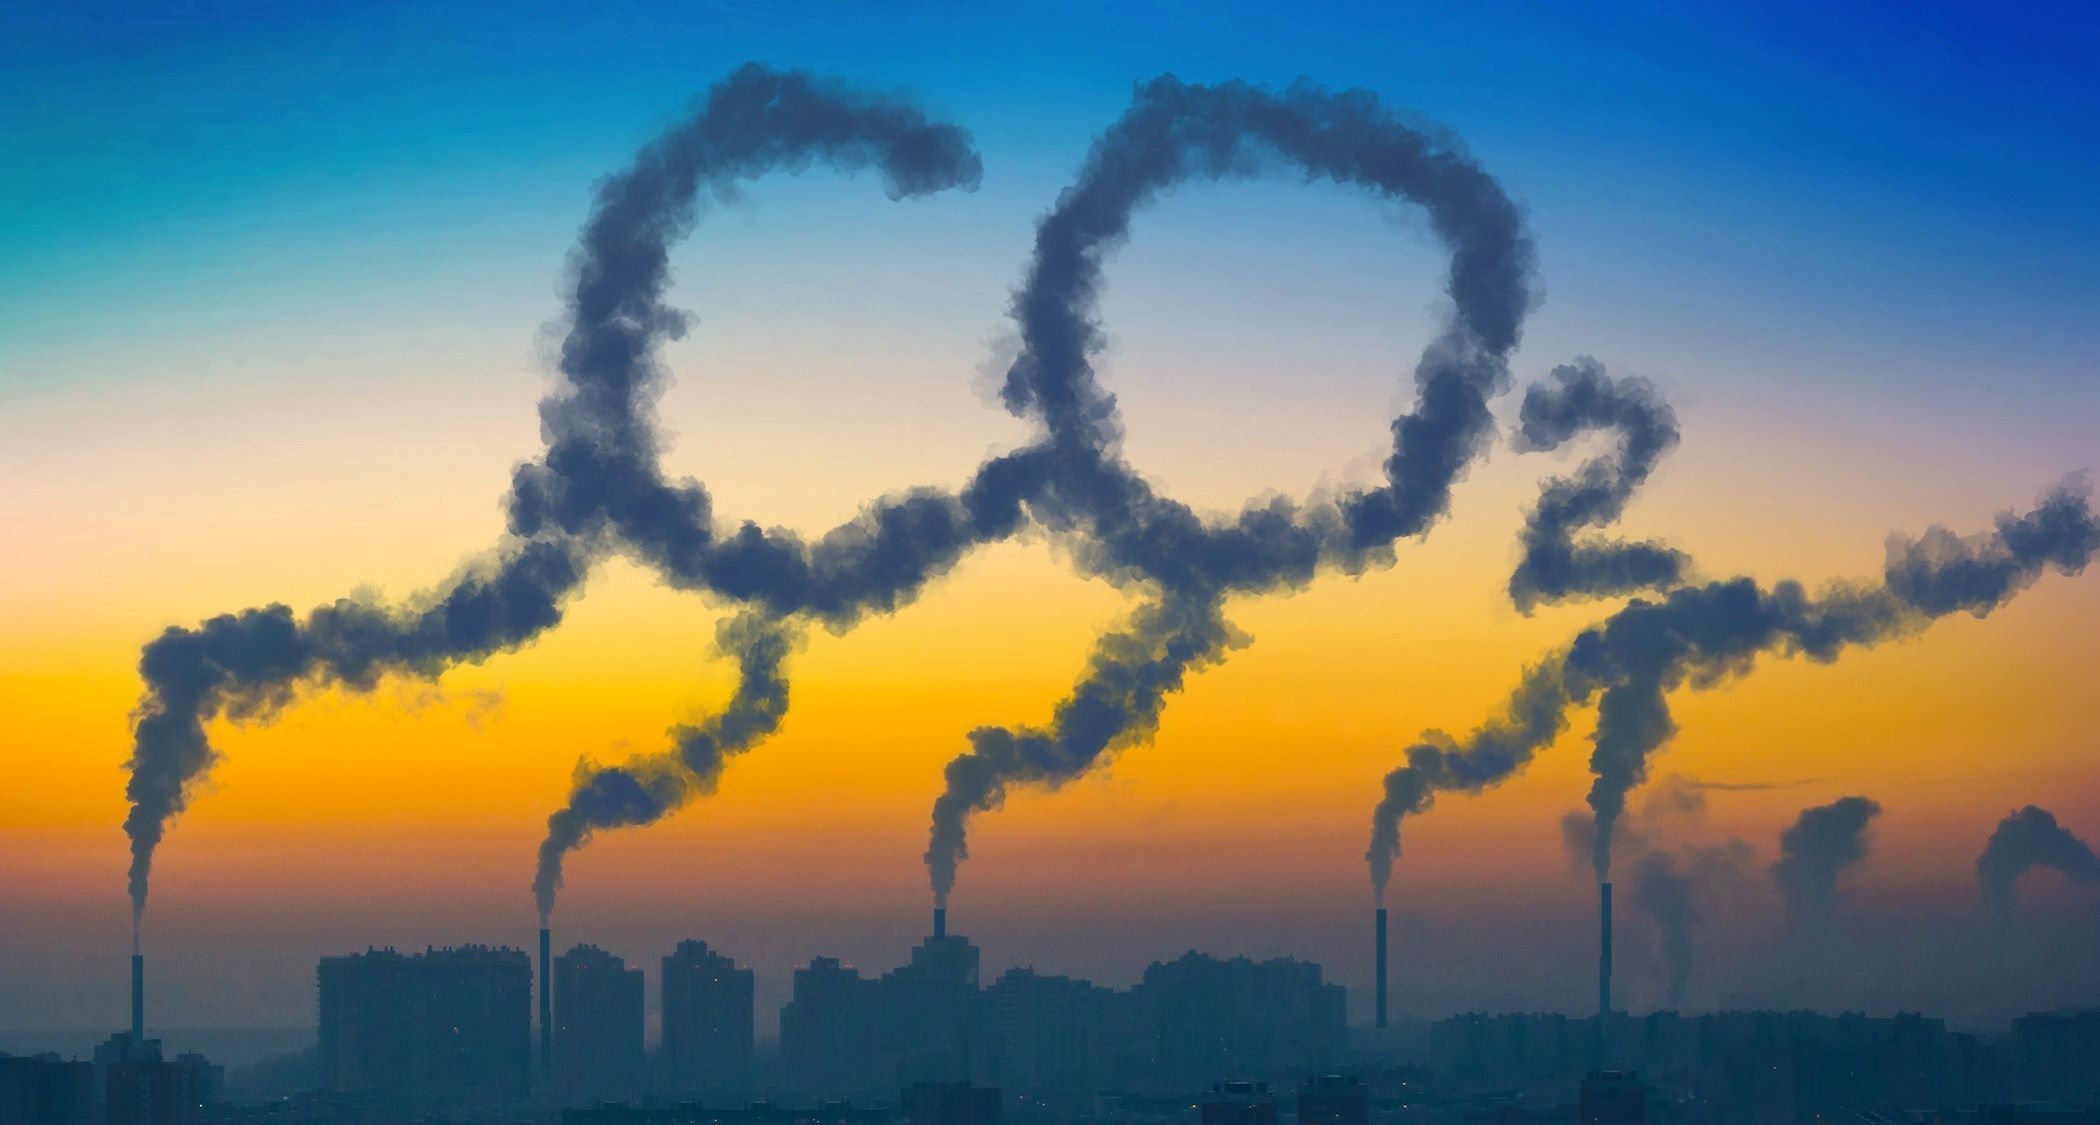 Clouds of pollution spelling out CO2